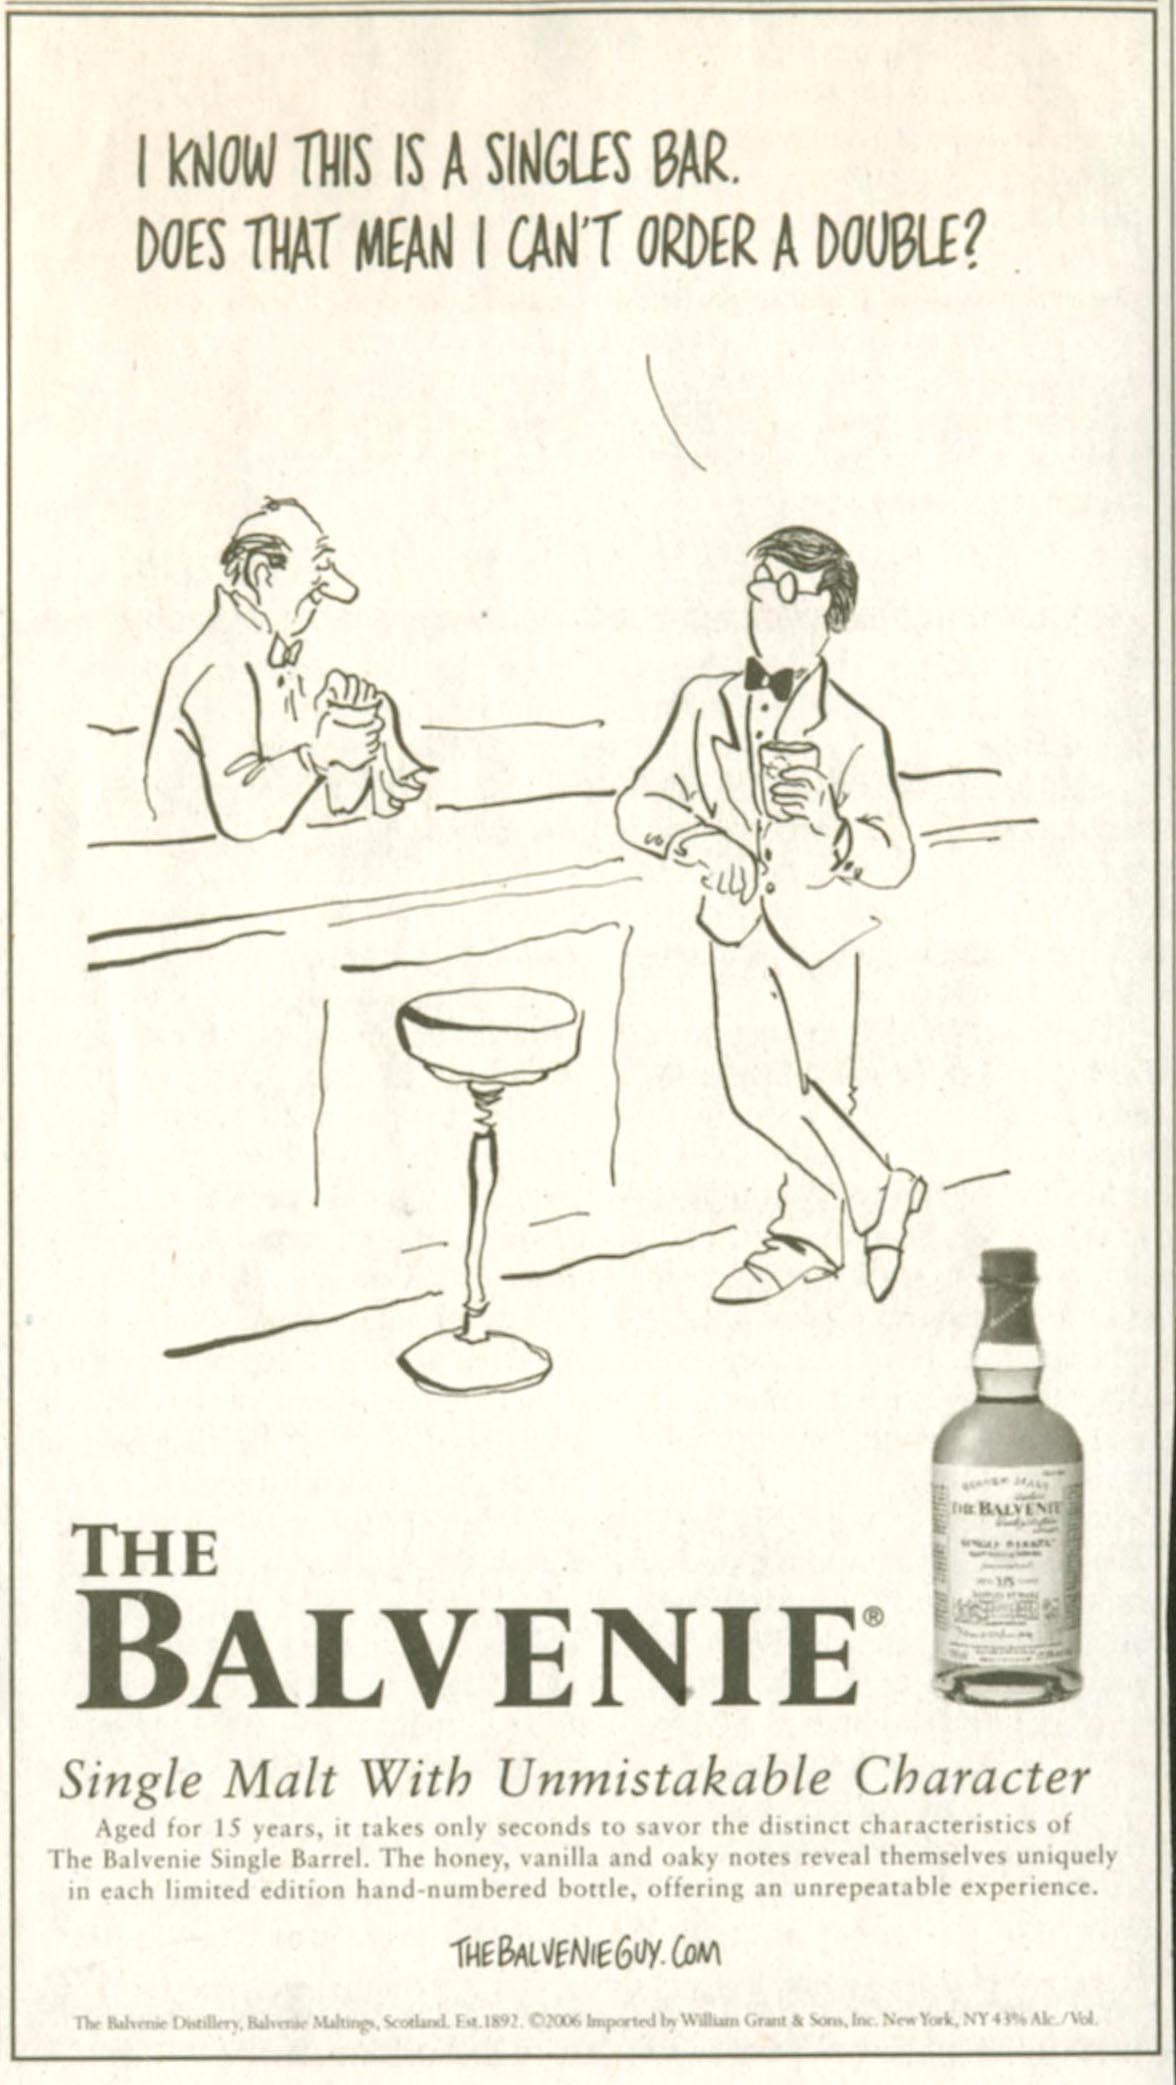 an ad from the baltimore cigarette store depicting a man in a bar